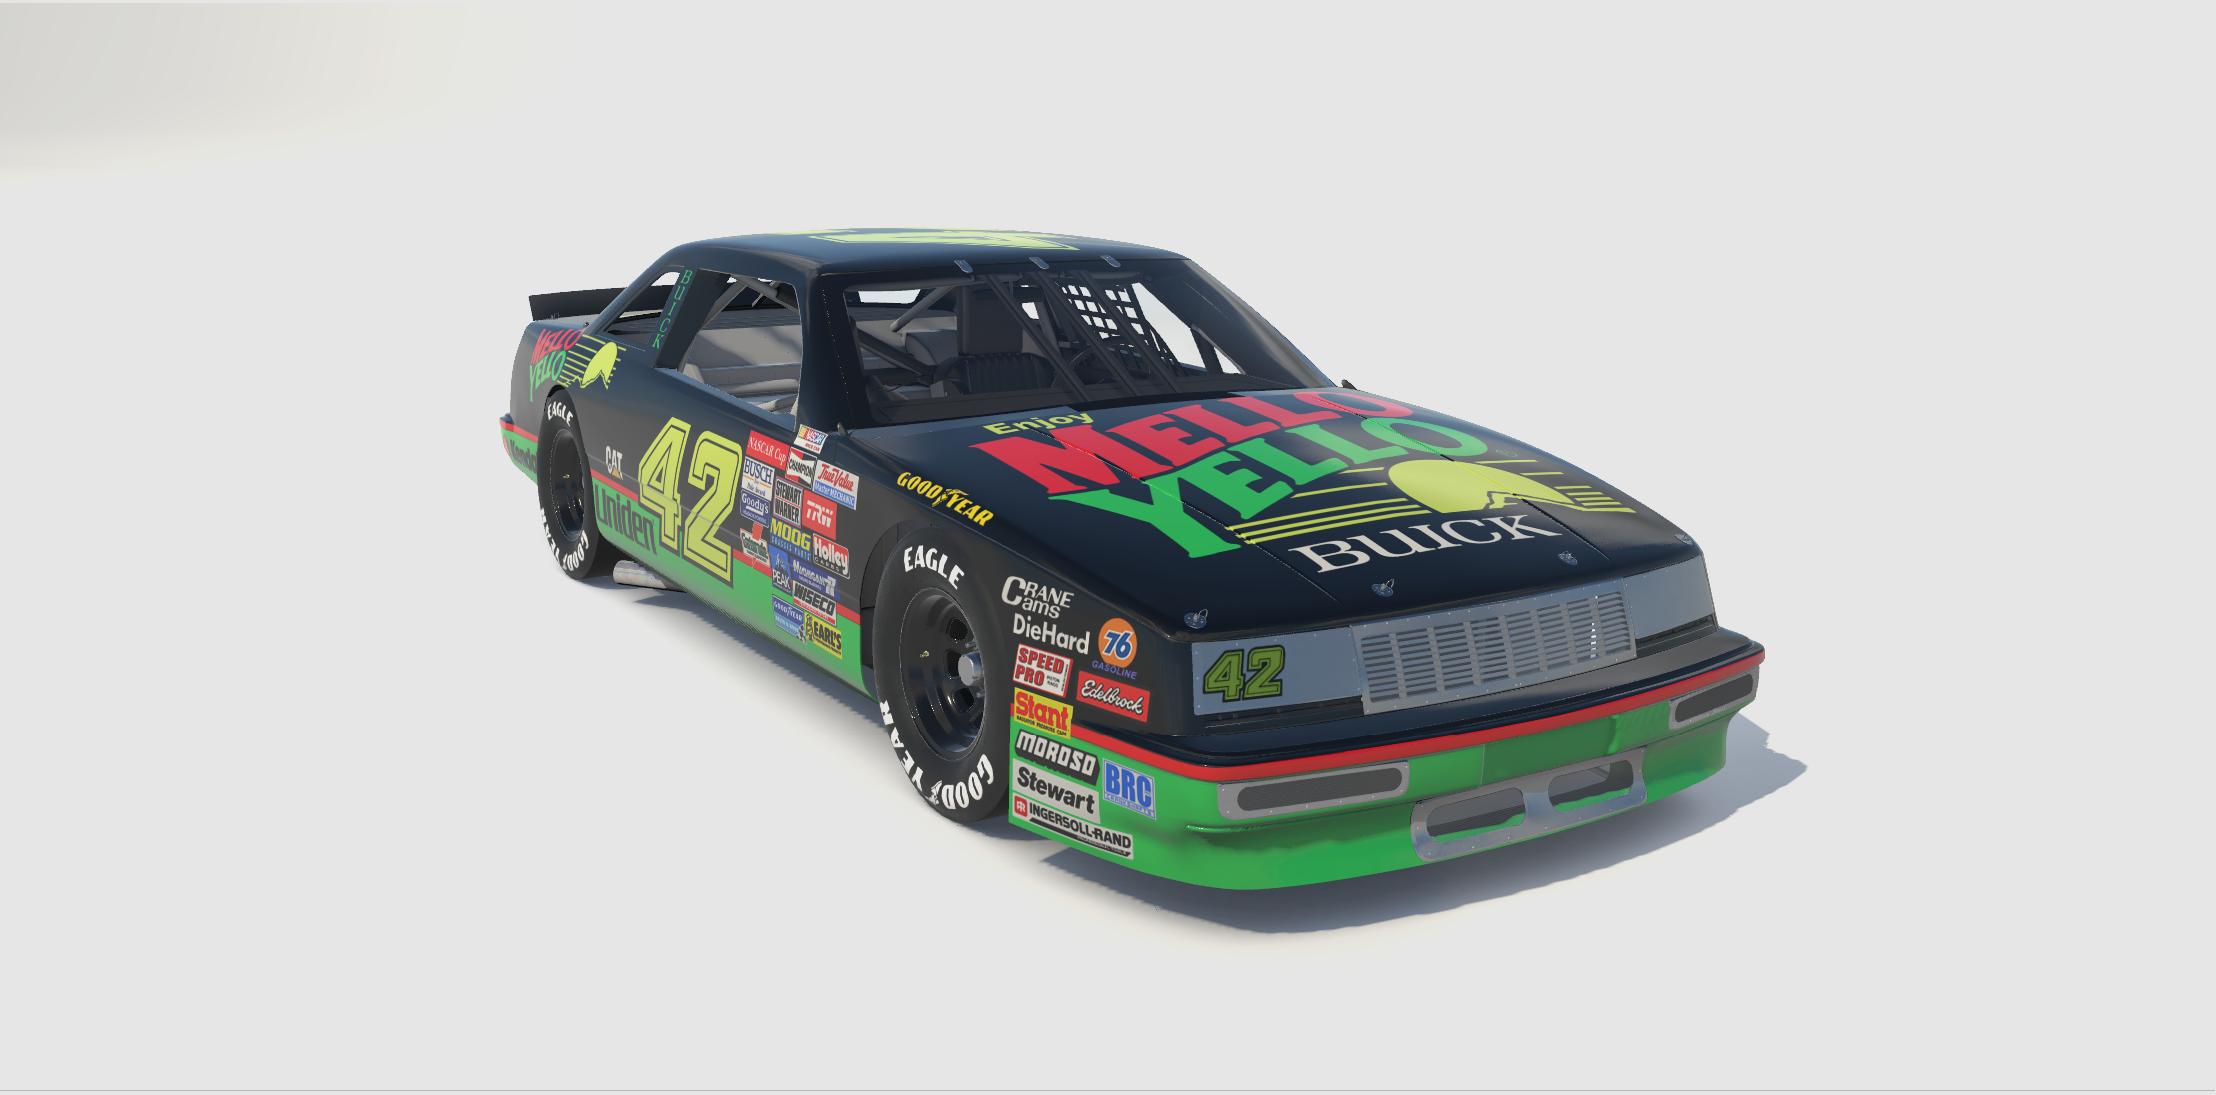 Preview of Fictional #42 Mello Yello Buick by Dustin Winegardner